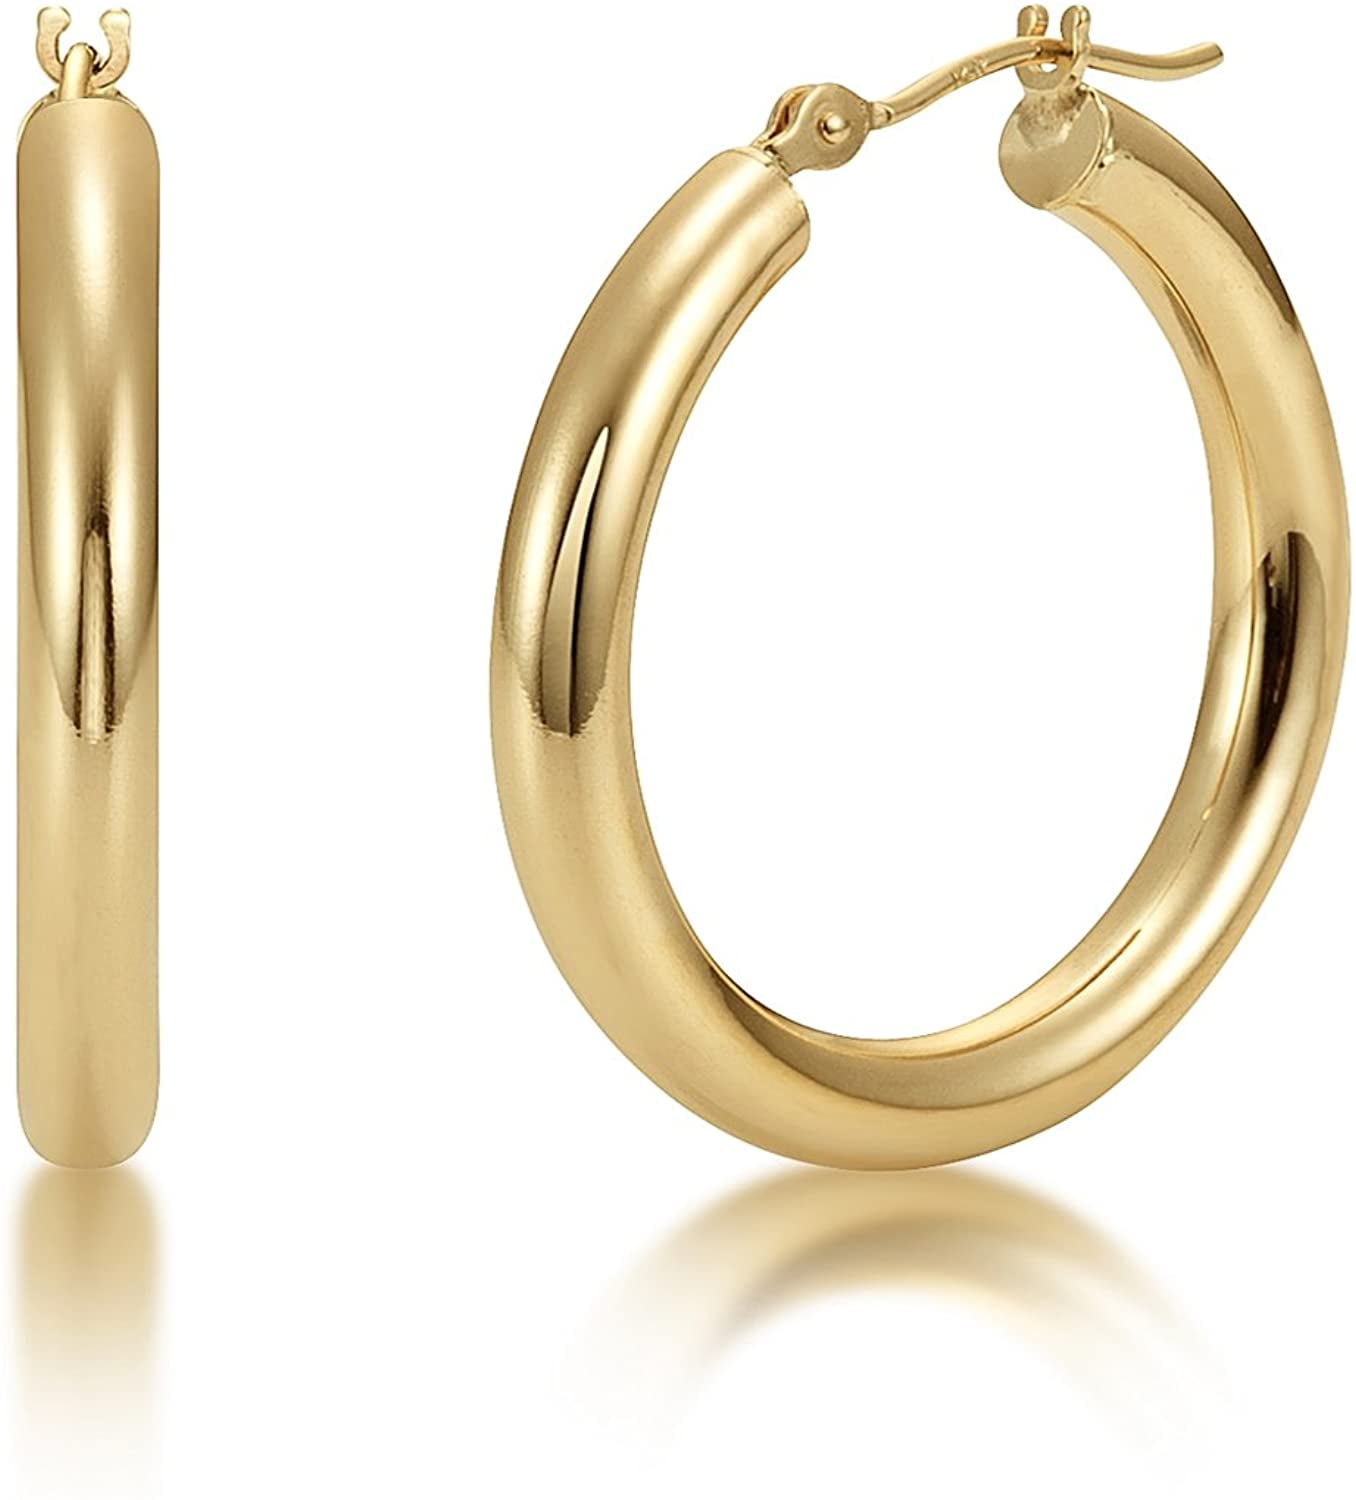 14 kt Yellow Gold 14k Polished 3mm Twisted Hoop Earrings 